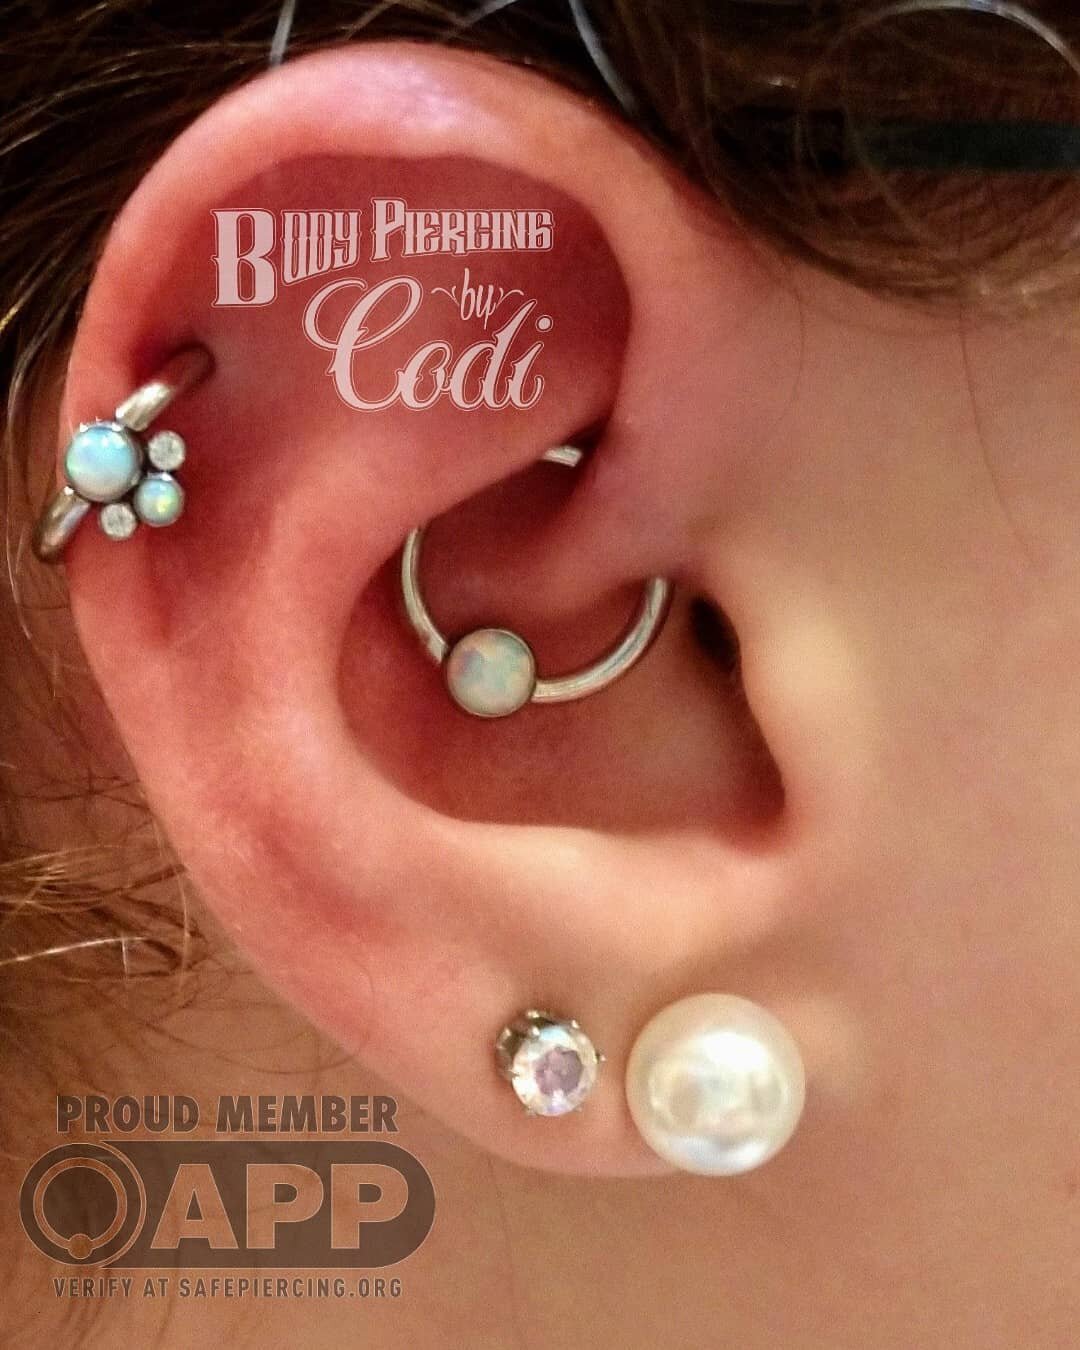 Check out these cool opal bead for these new Daith and Helix piercings.

#daithpiercing #helixpiercing #earpiercing #bling #bodypiercing #bodyjewelry #piercings #pretty #needfulthingsinc #APP #professionalpiercing #appmember @safepiercing #safepierci